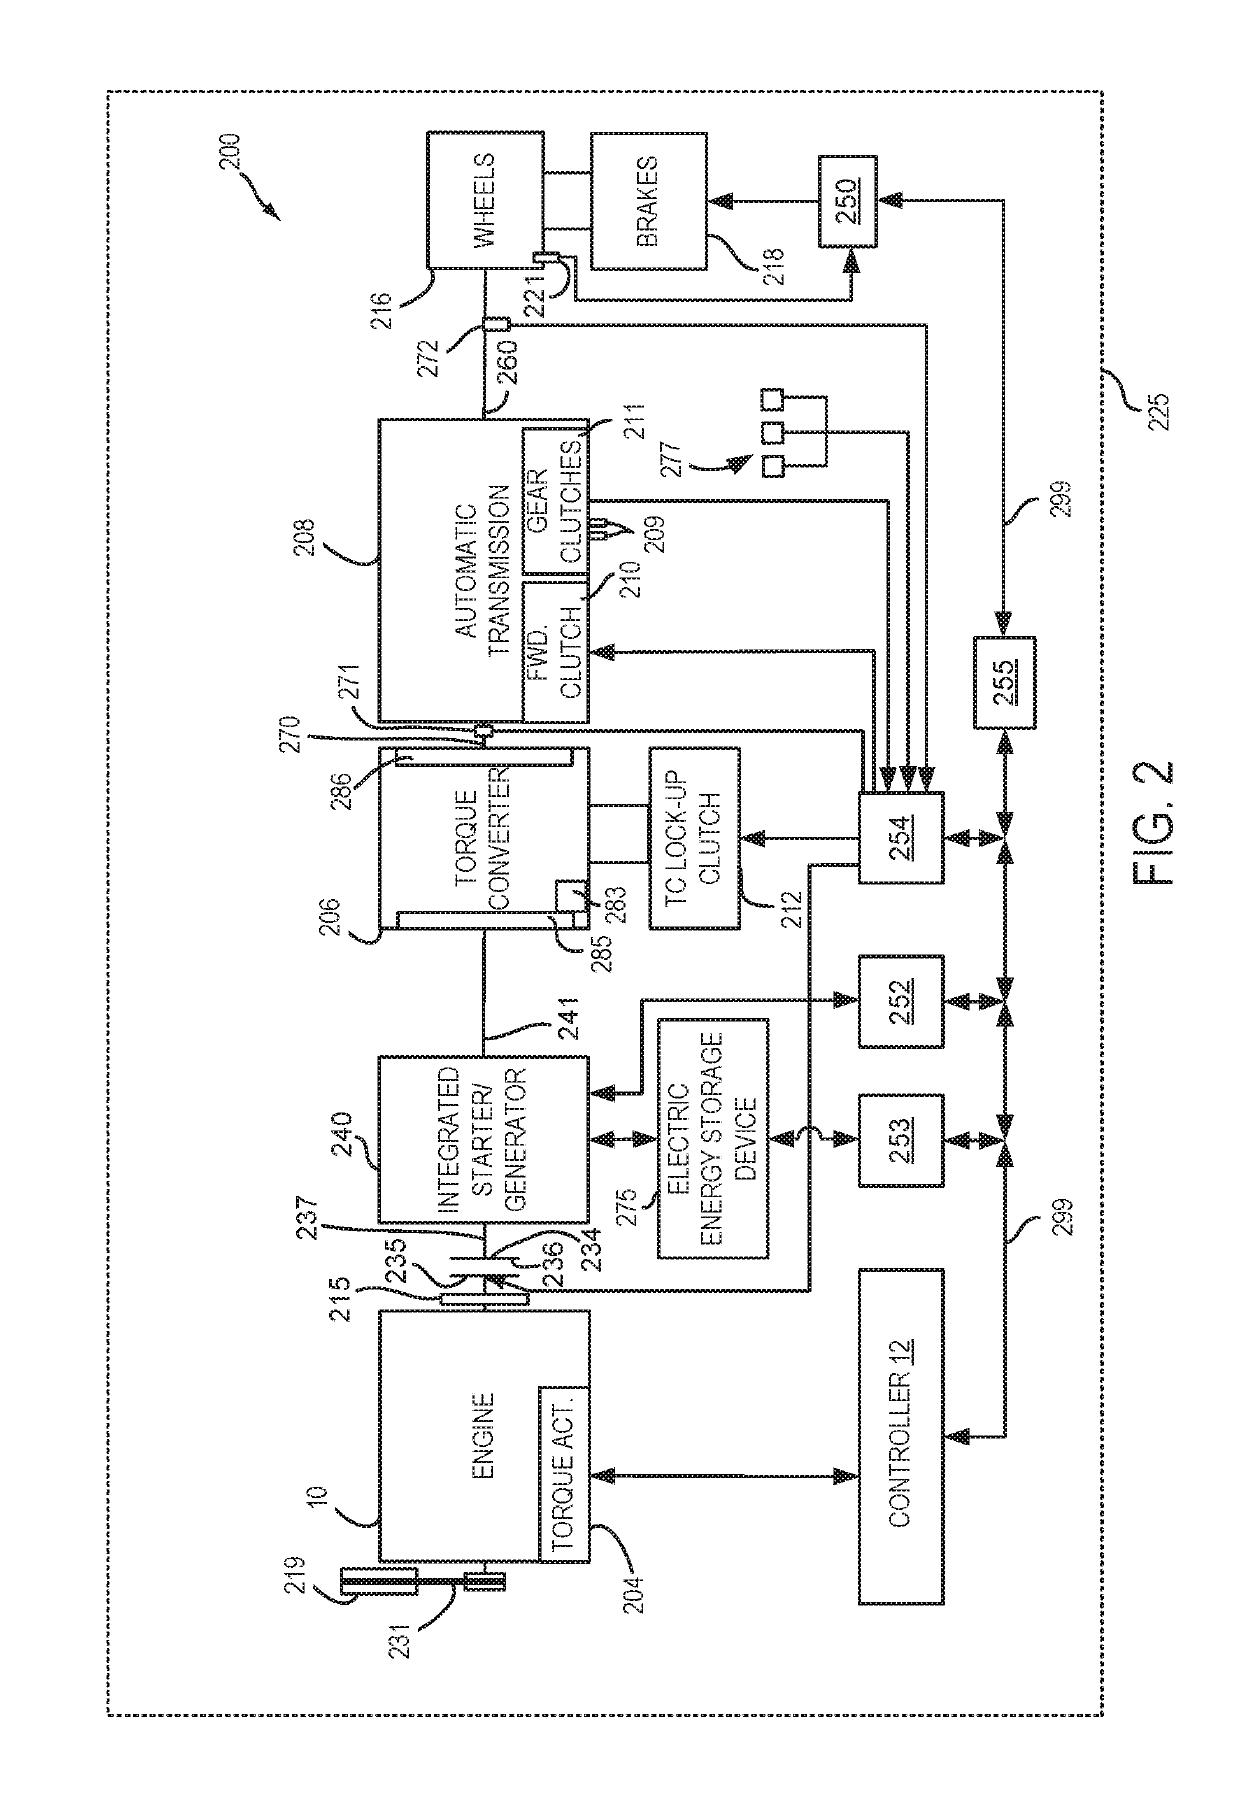 Methods and system for delivering powertrain torque